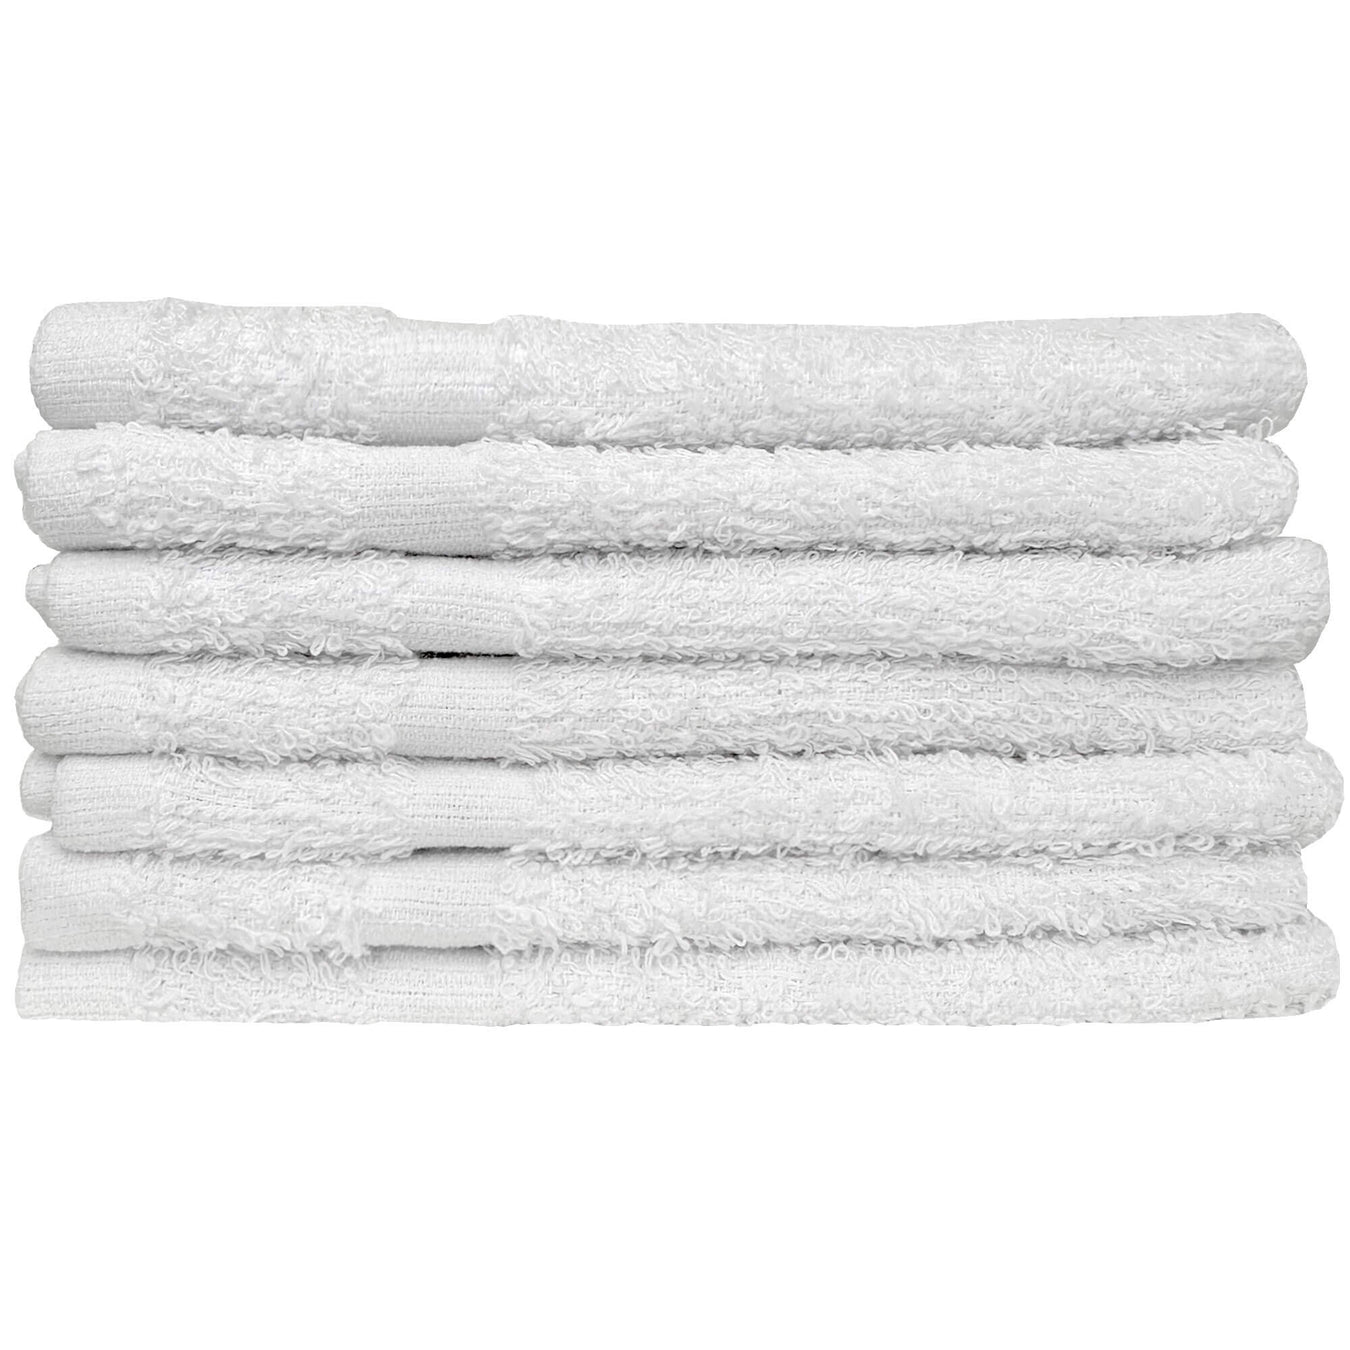 Towels N More - 12 Pack 22x44 Soft Gym Towels/Small Bath Towels White 100%  Ring Spun Loops - Home Essentials Lightweight Bathroom Towels Set - Ideal